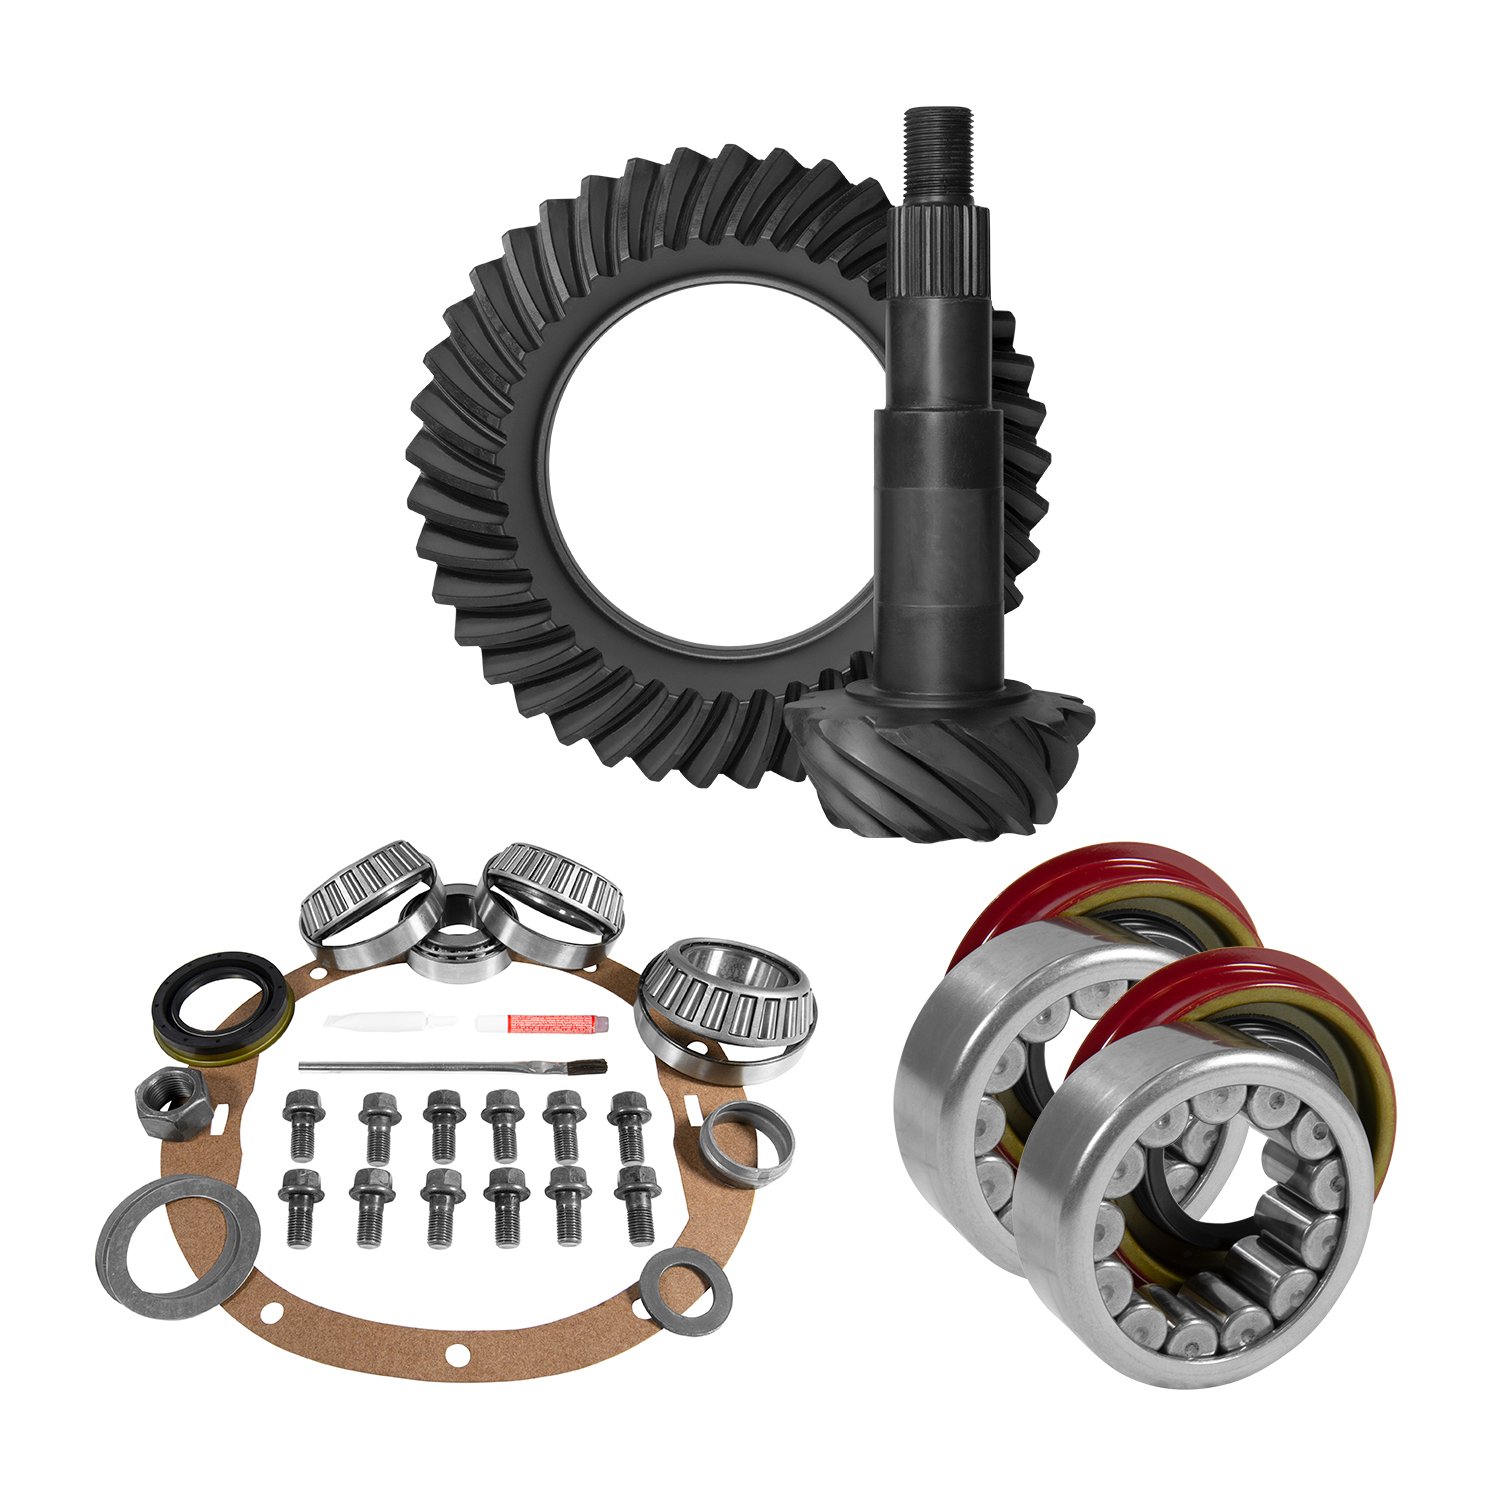 USA Standard 10719 8.5 in. GM 4.11 Rear Ring & Pinion Install Kit, Axle Bearings, 1.78 in. Case Journal